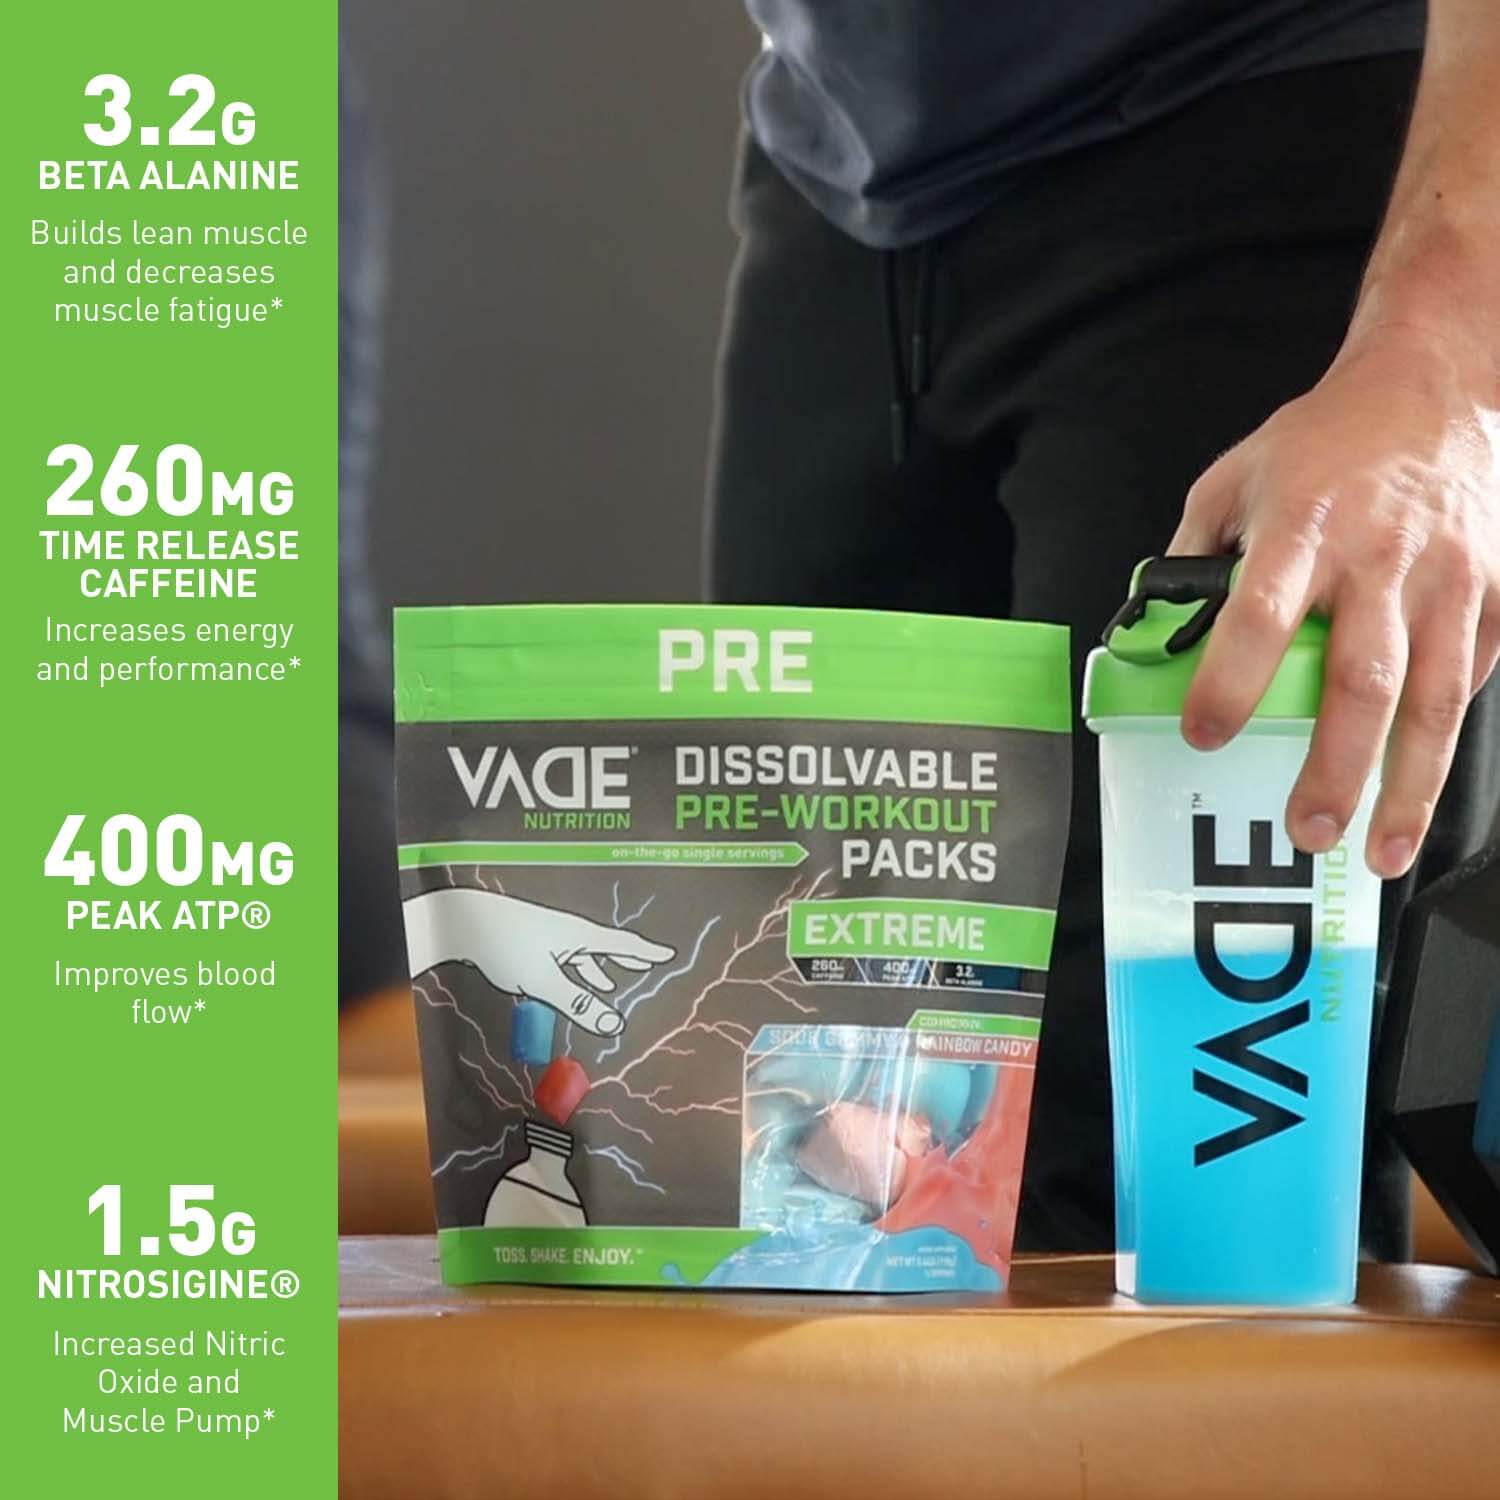 Ditch the Scoop: VADE Extreme Pre Workout Packs Dissolve in Your Shaker